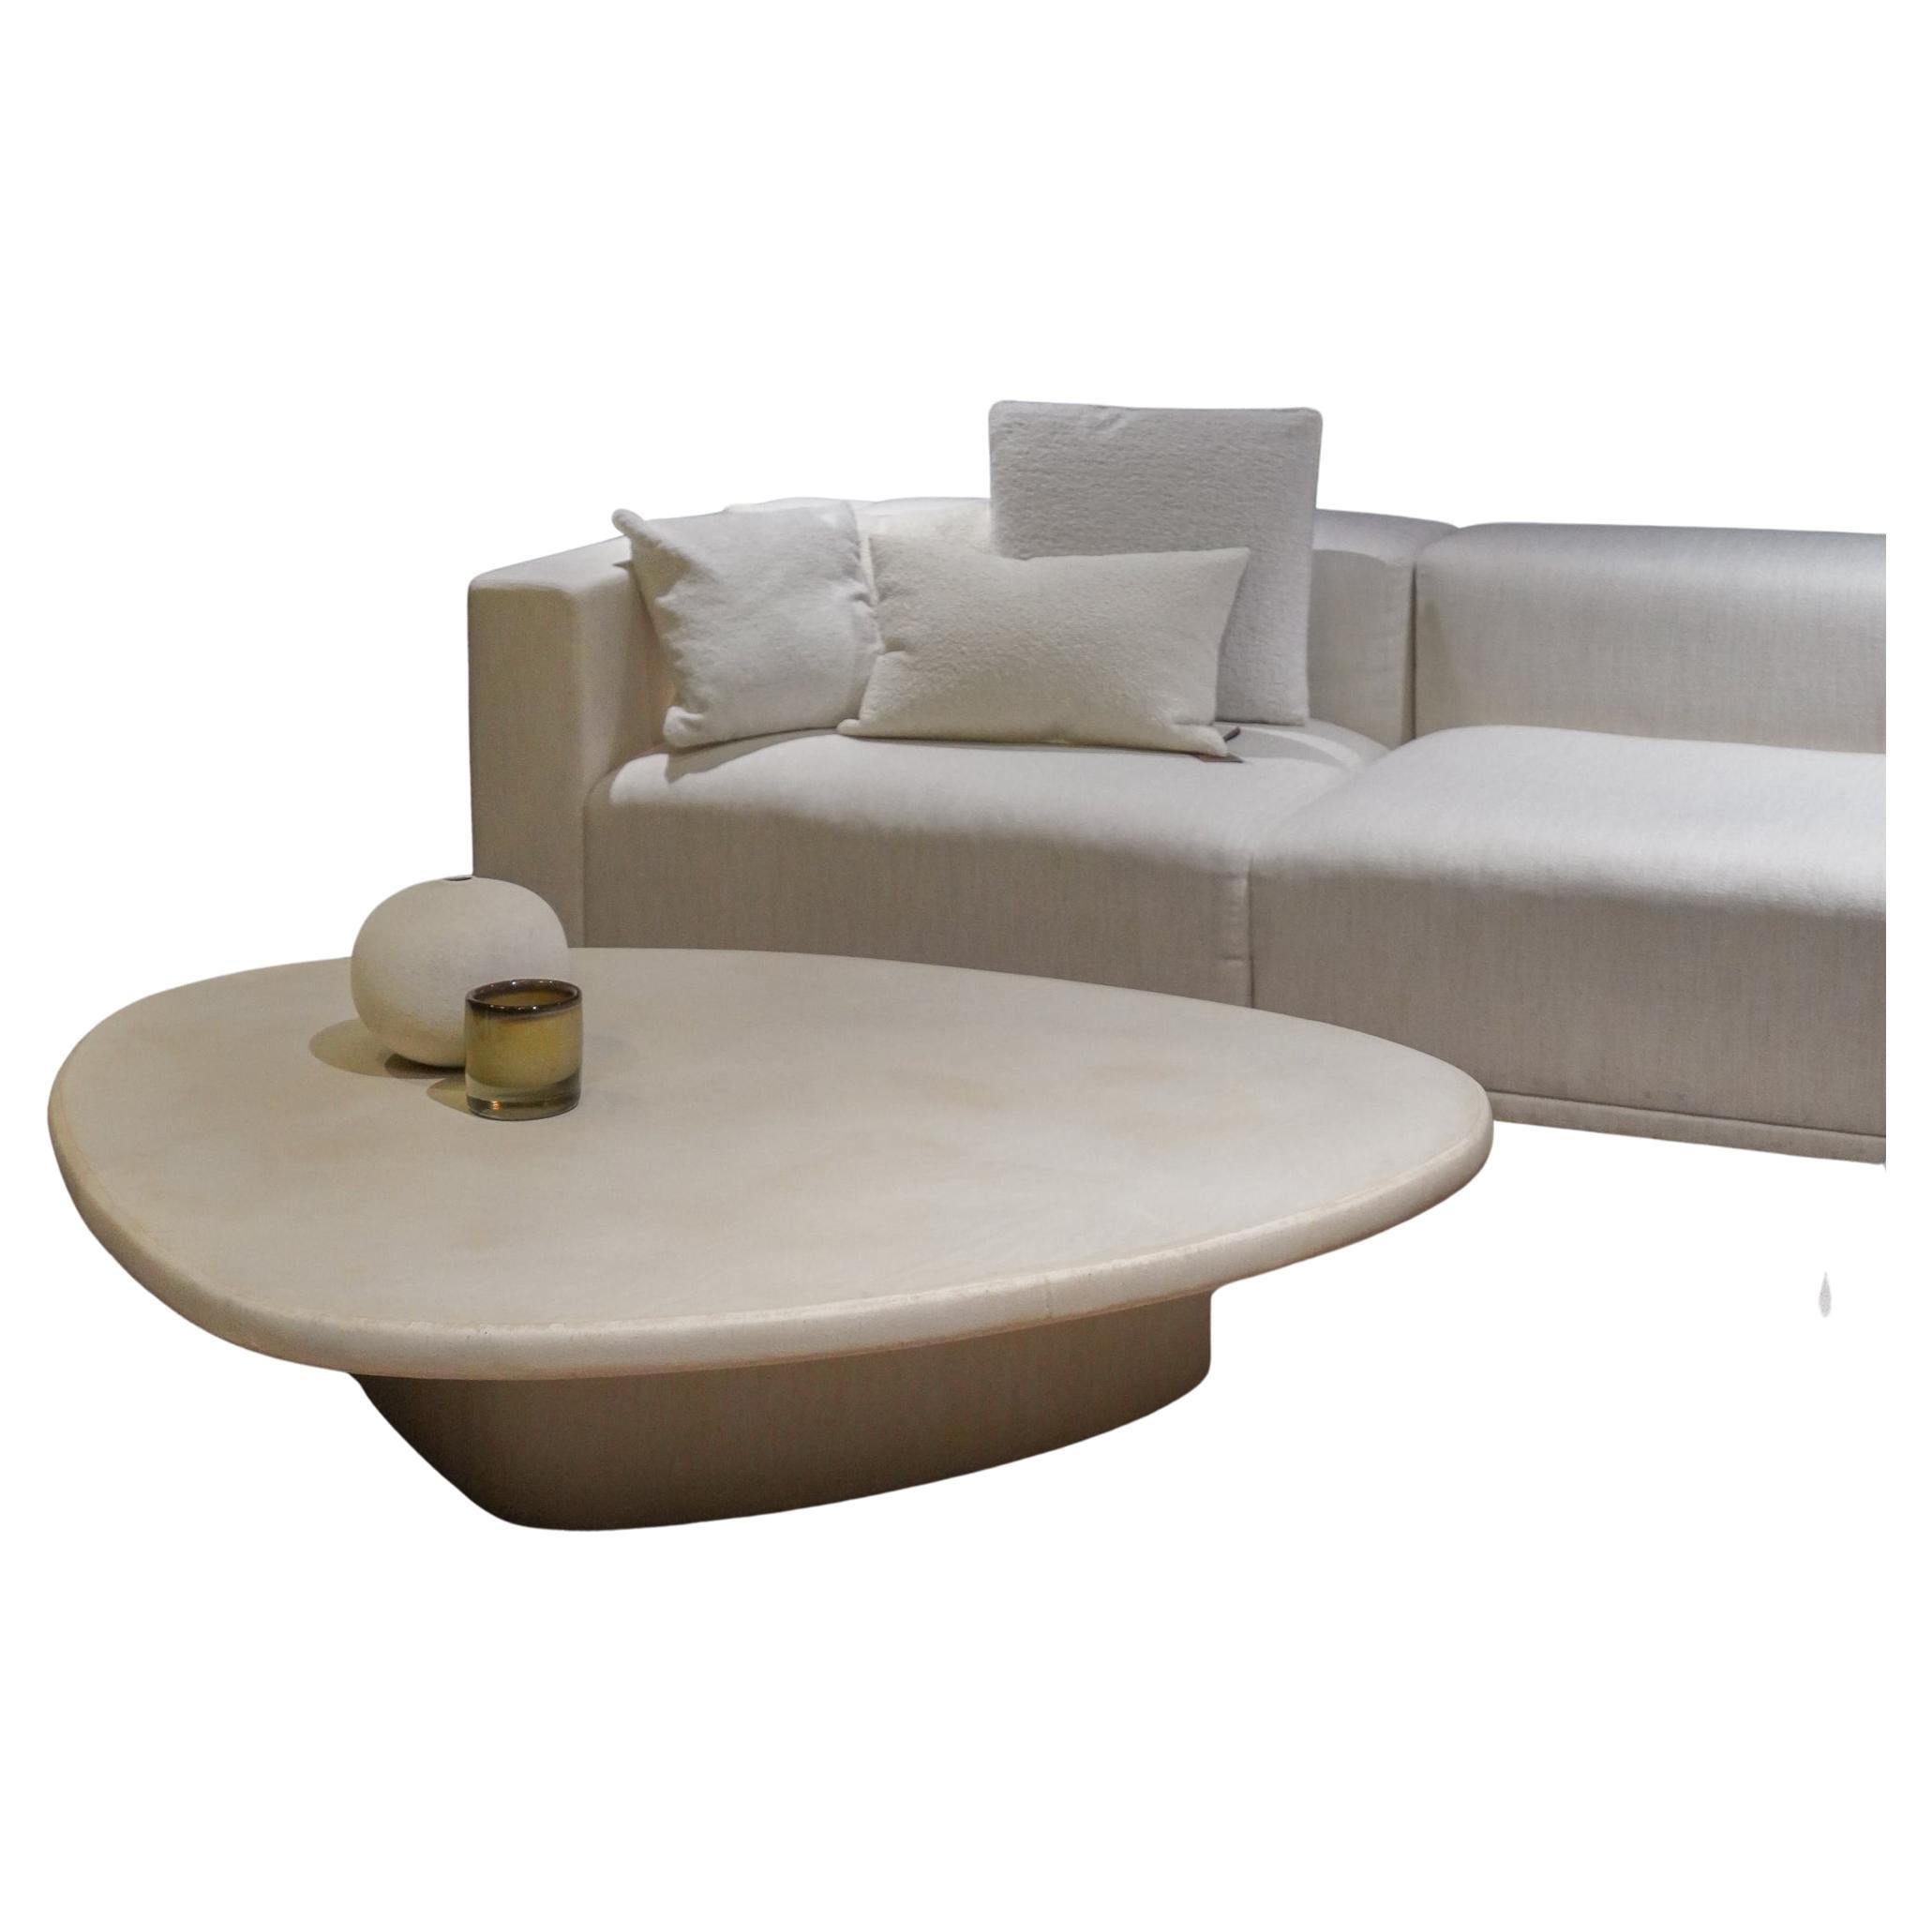 Liz Tables Boulder Shape Coffee Table in Mortex For Sale